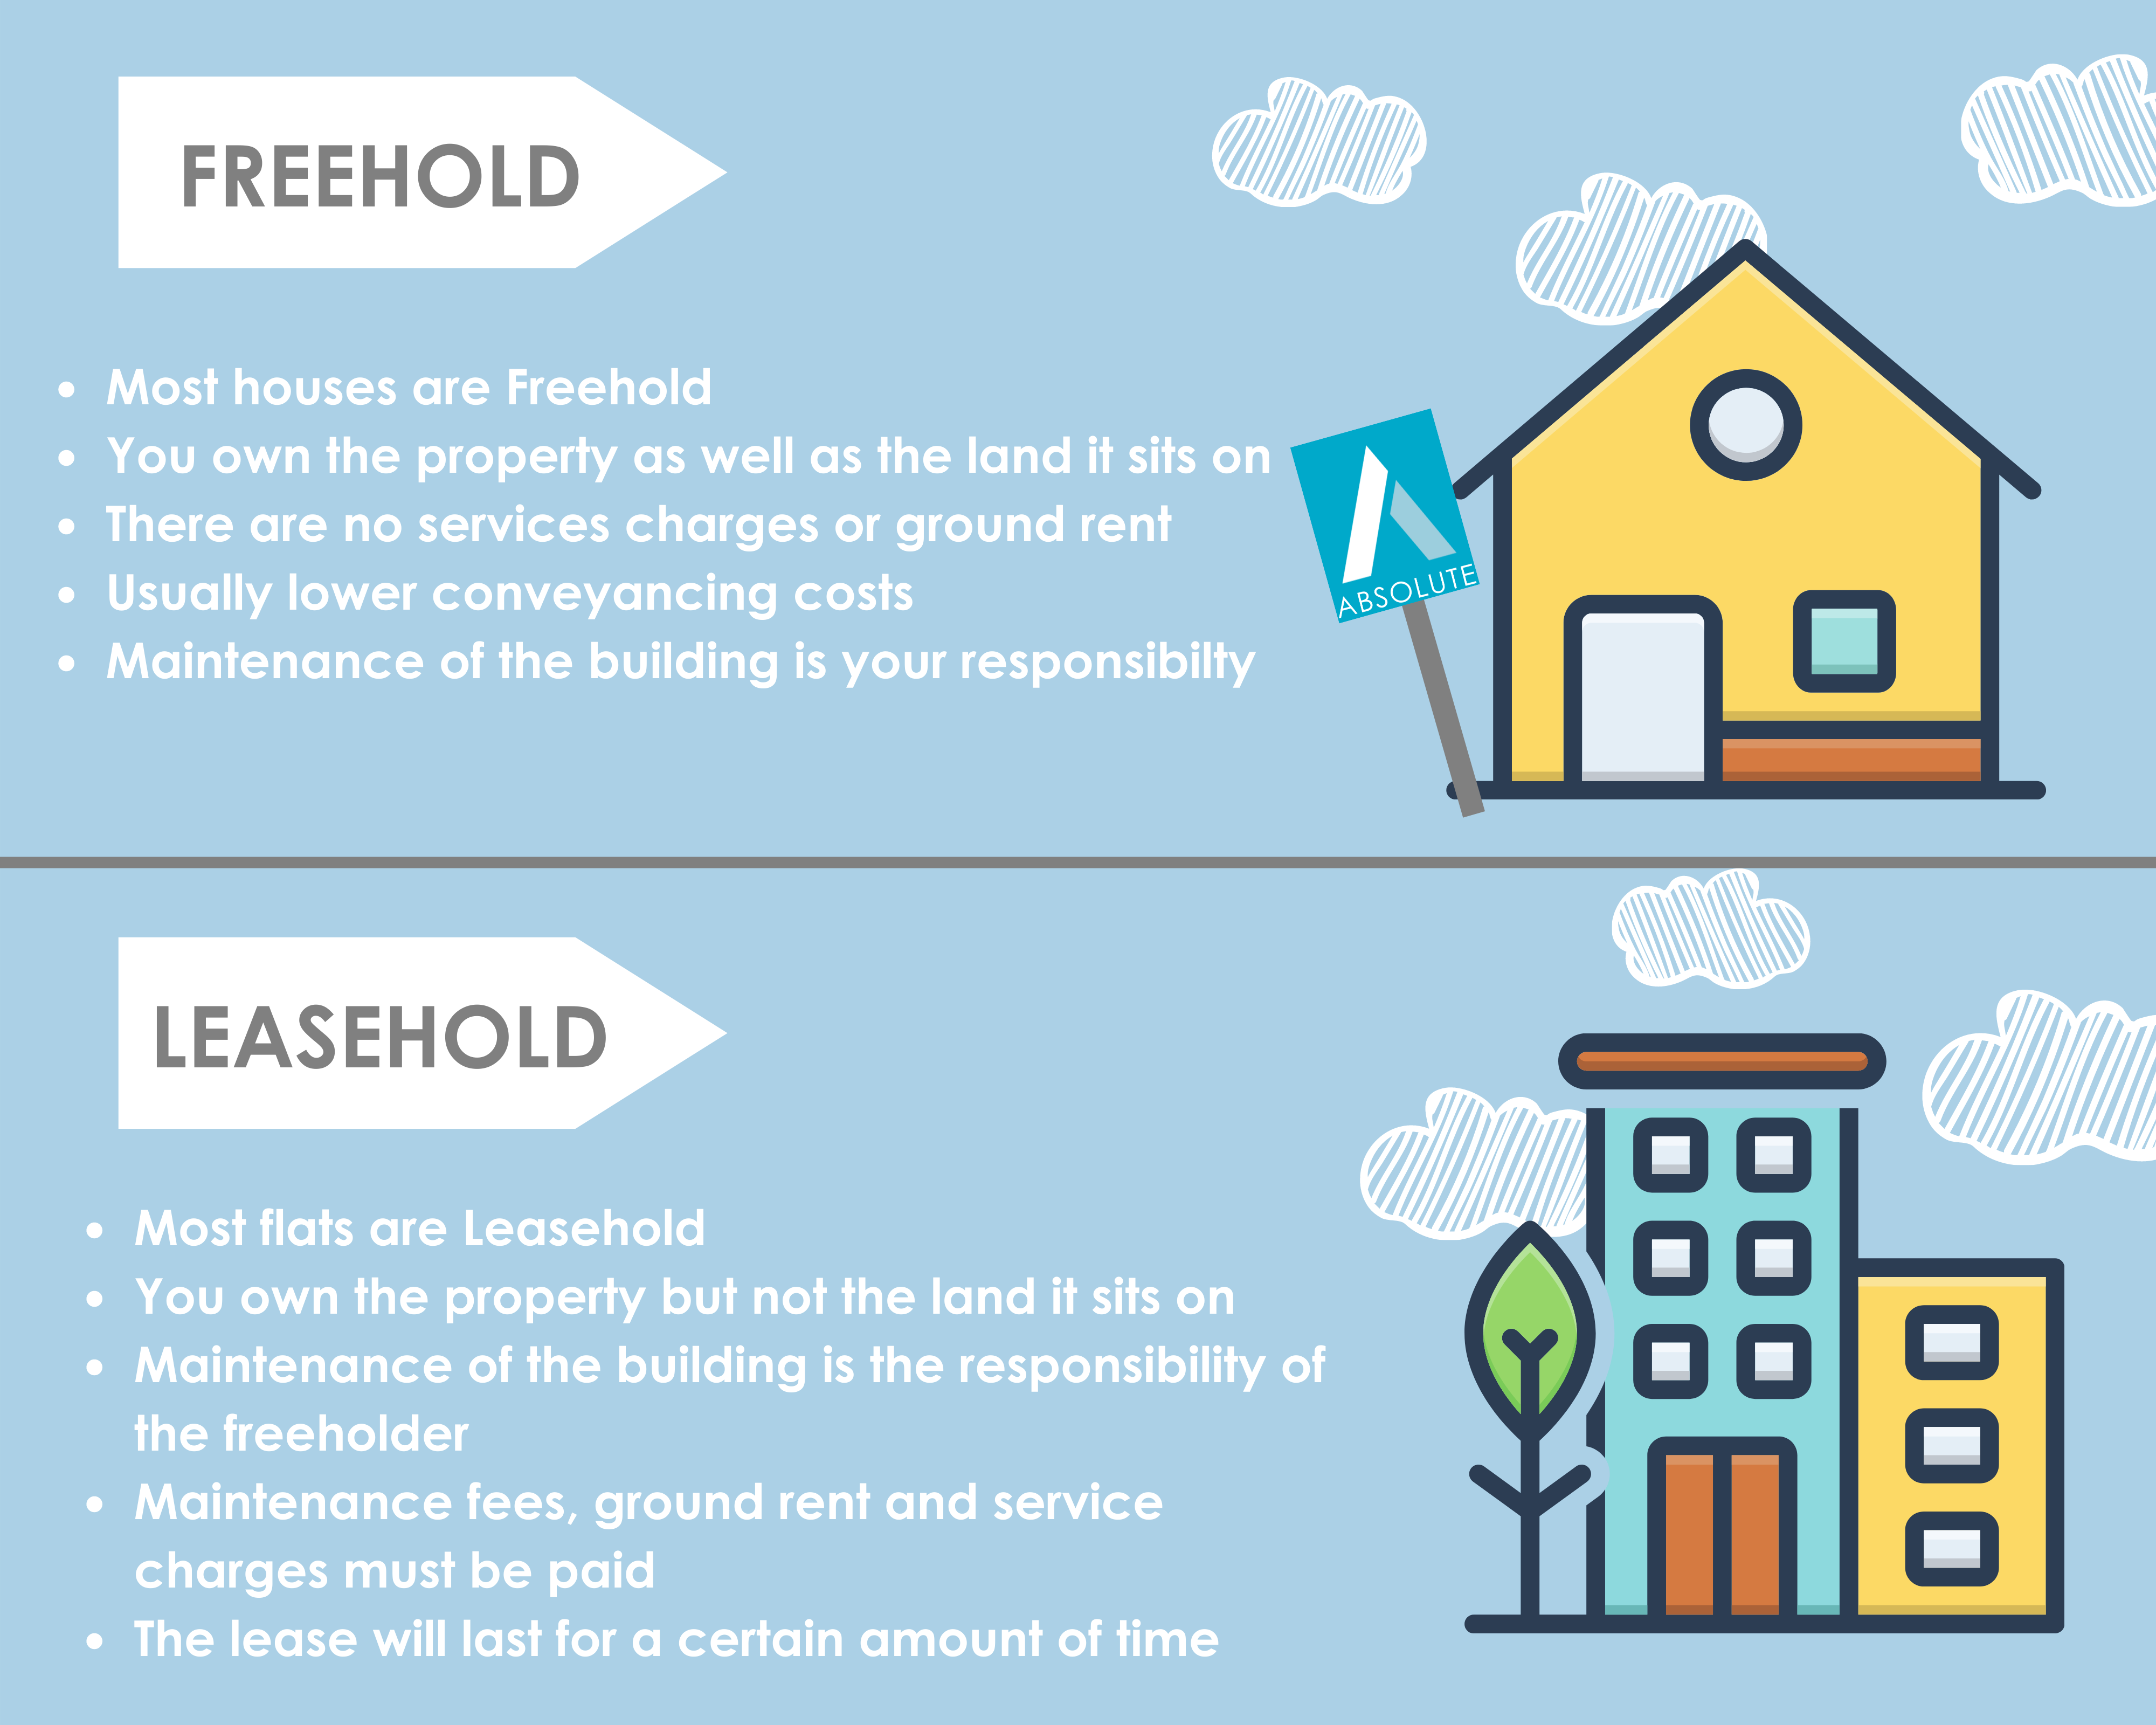 All You Need To Know About Freehold And Leasehold Properties